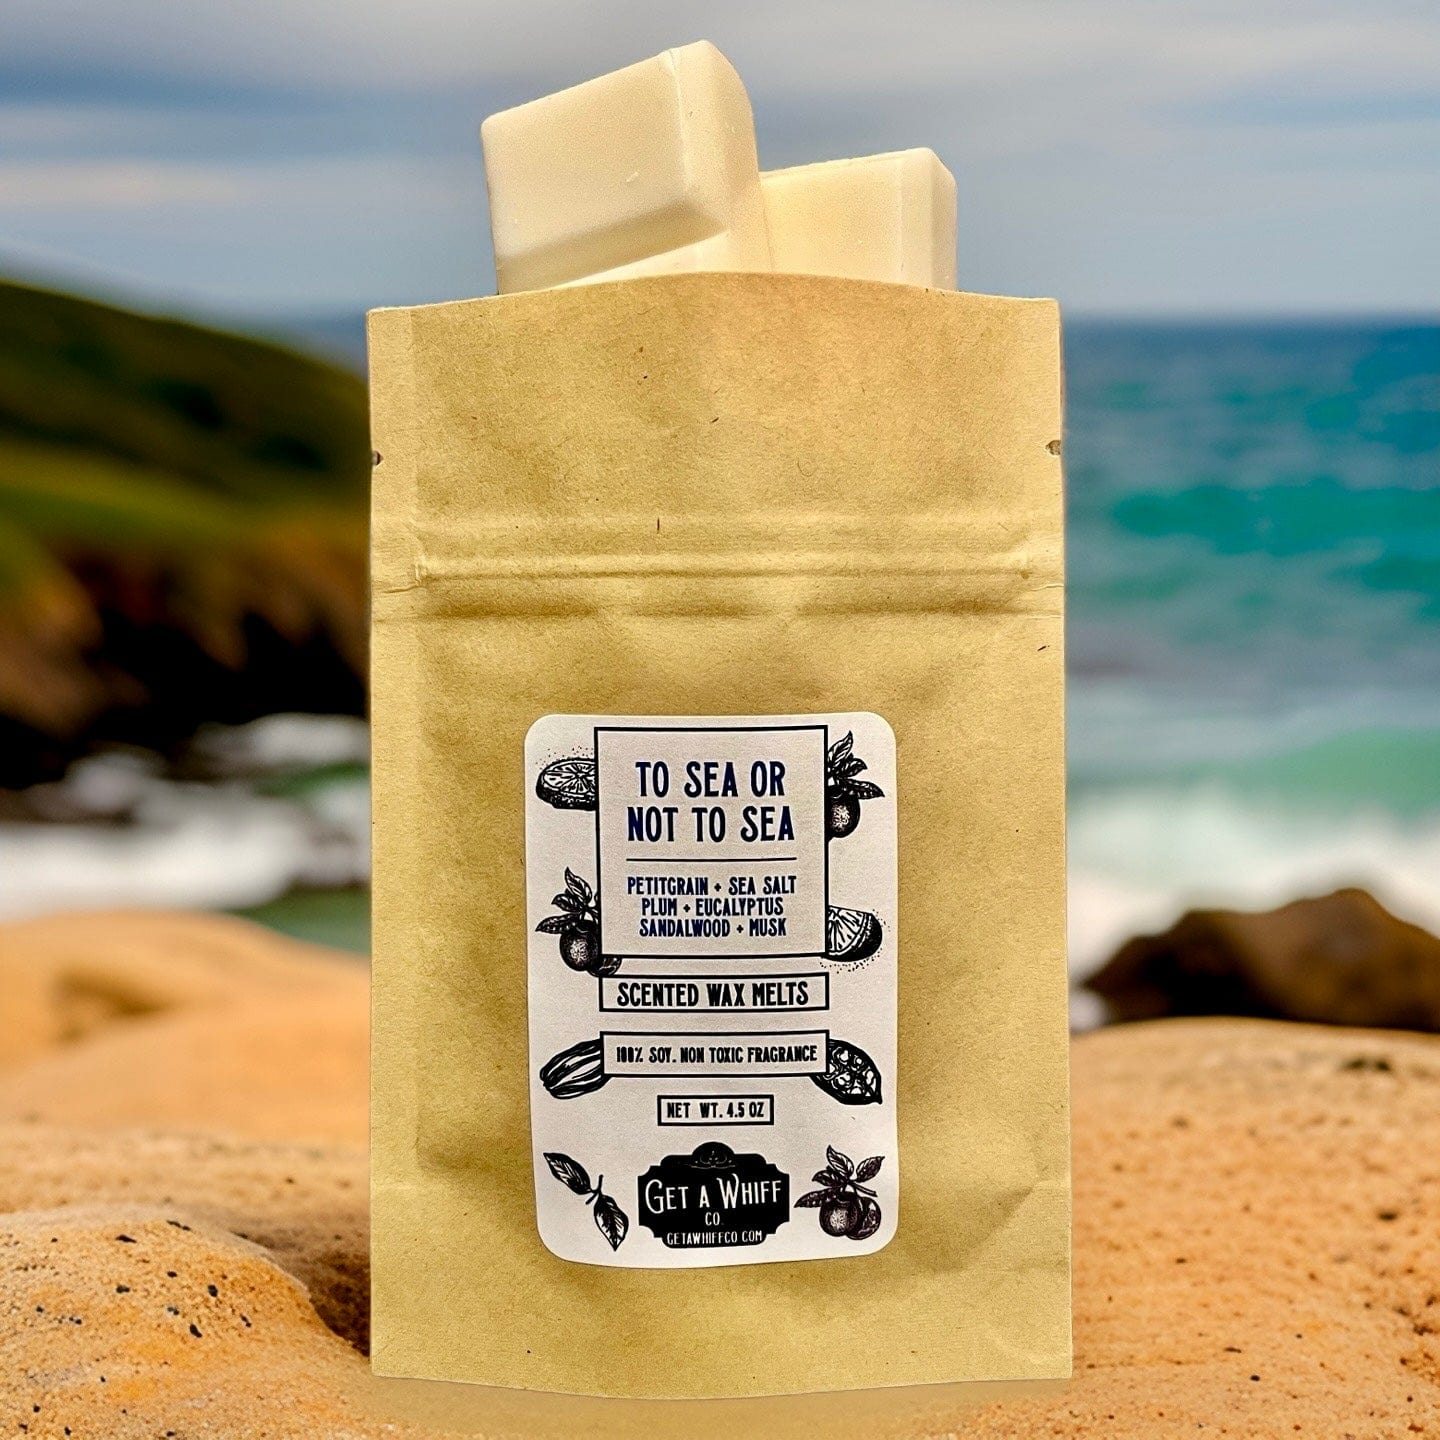 Sea Salt & Musk Wax Melts (To Sea Or Not To Sea)